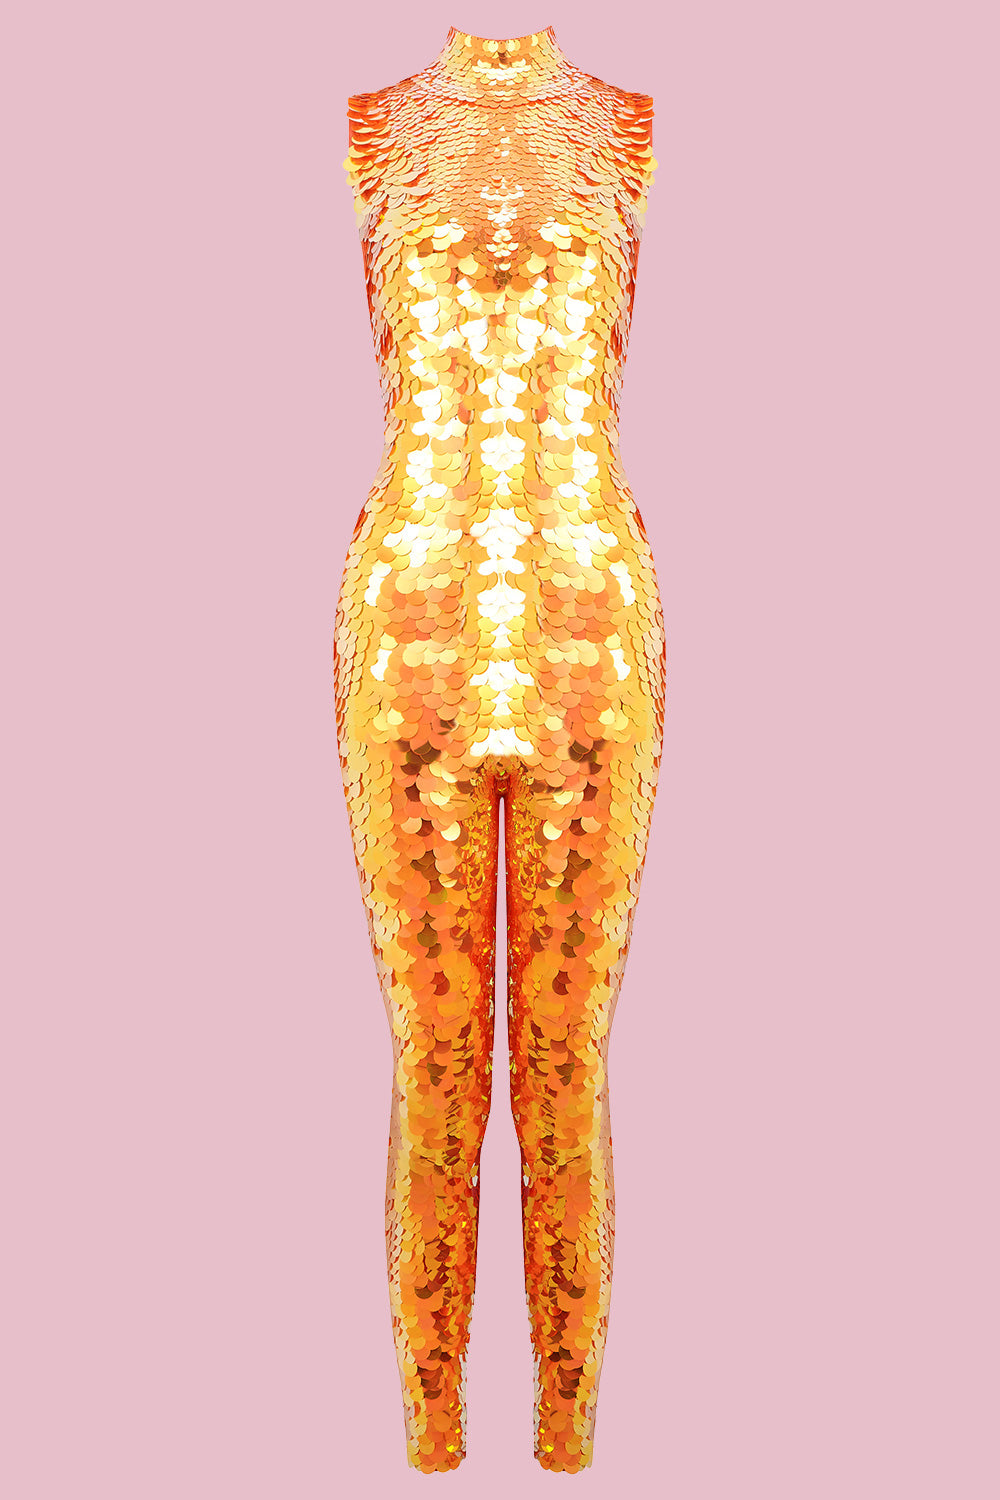 An all-in-one sequin stretchy festival jumpsuit made with large round holographic Rosa Bloom sequins. The Fox jumpsuit in front of a pink background, glistens all over in this colour way, creating a mix of shimmering sequin colours of gold and yellow that sparkles in the light.